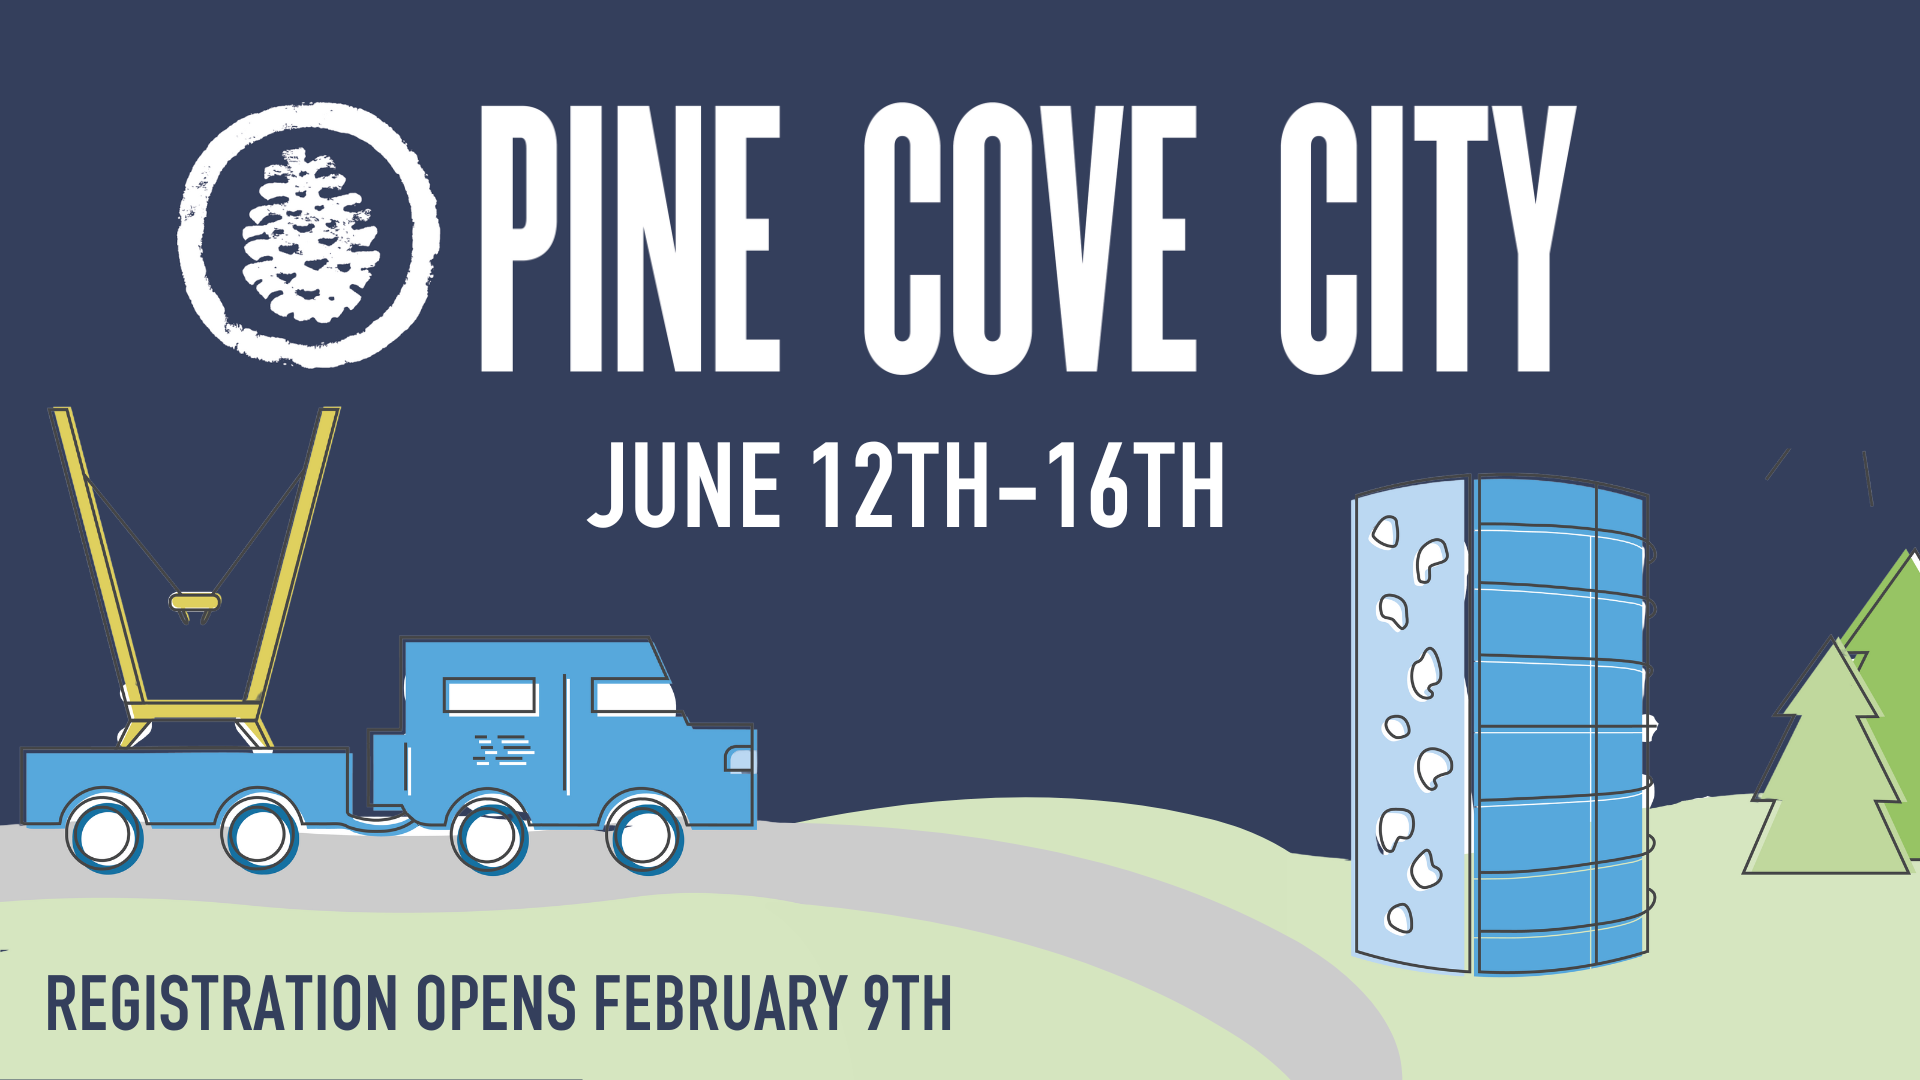 Pine Cove City is returning for K-5th graders June 12-16th. This is an amazing day camp that will be hosted at City Church! Kids will have all the joys of sleep away camp without spending the night! 

Click the image to register!